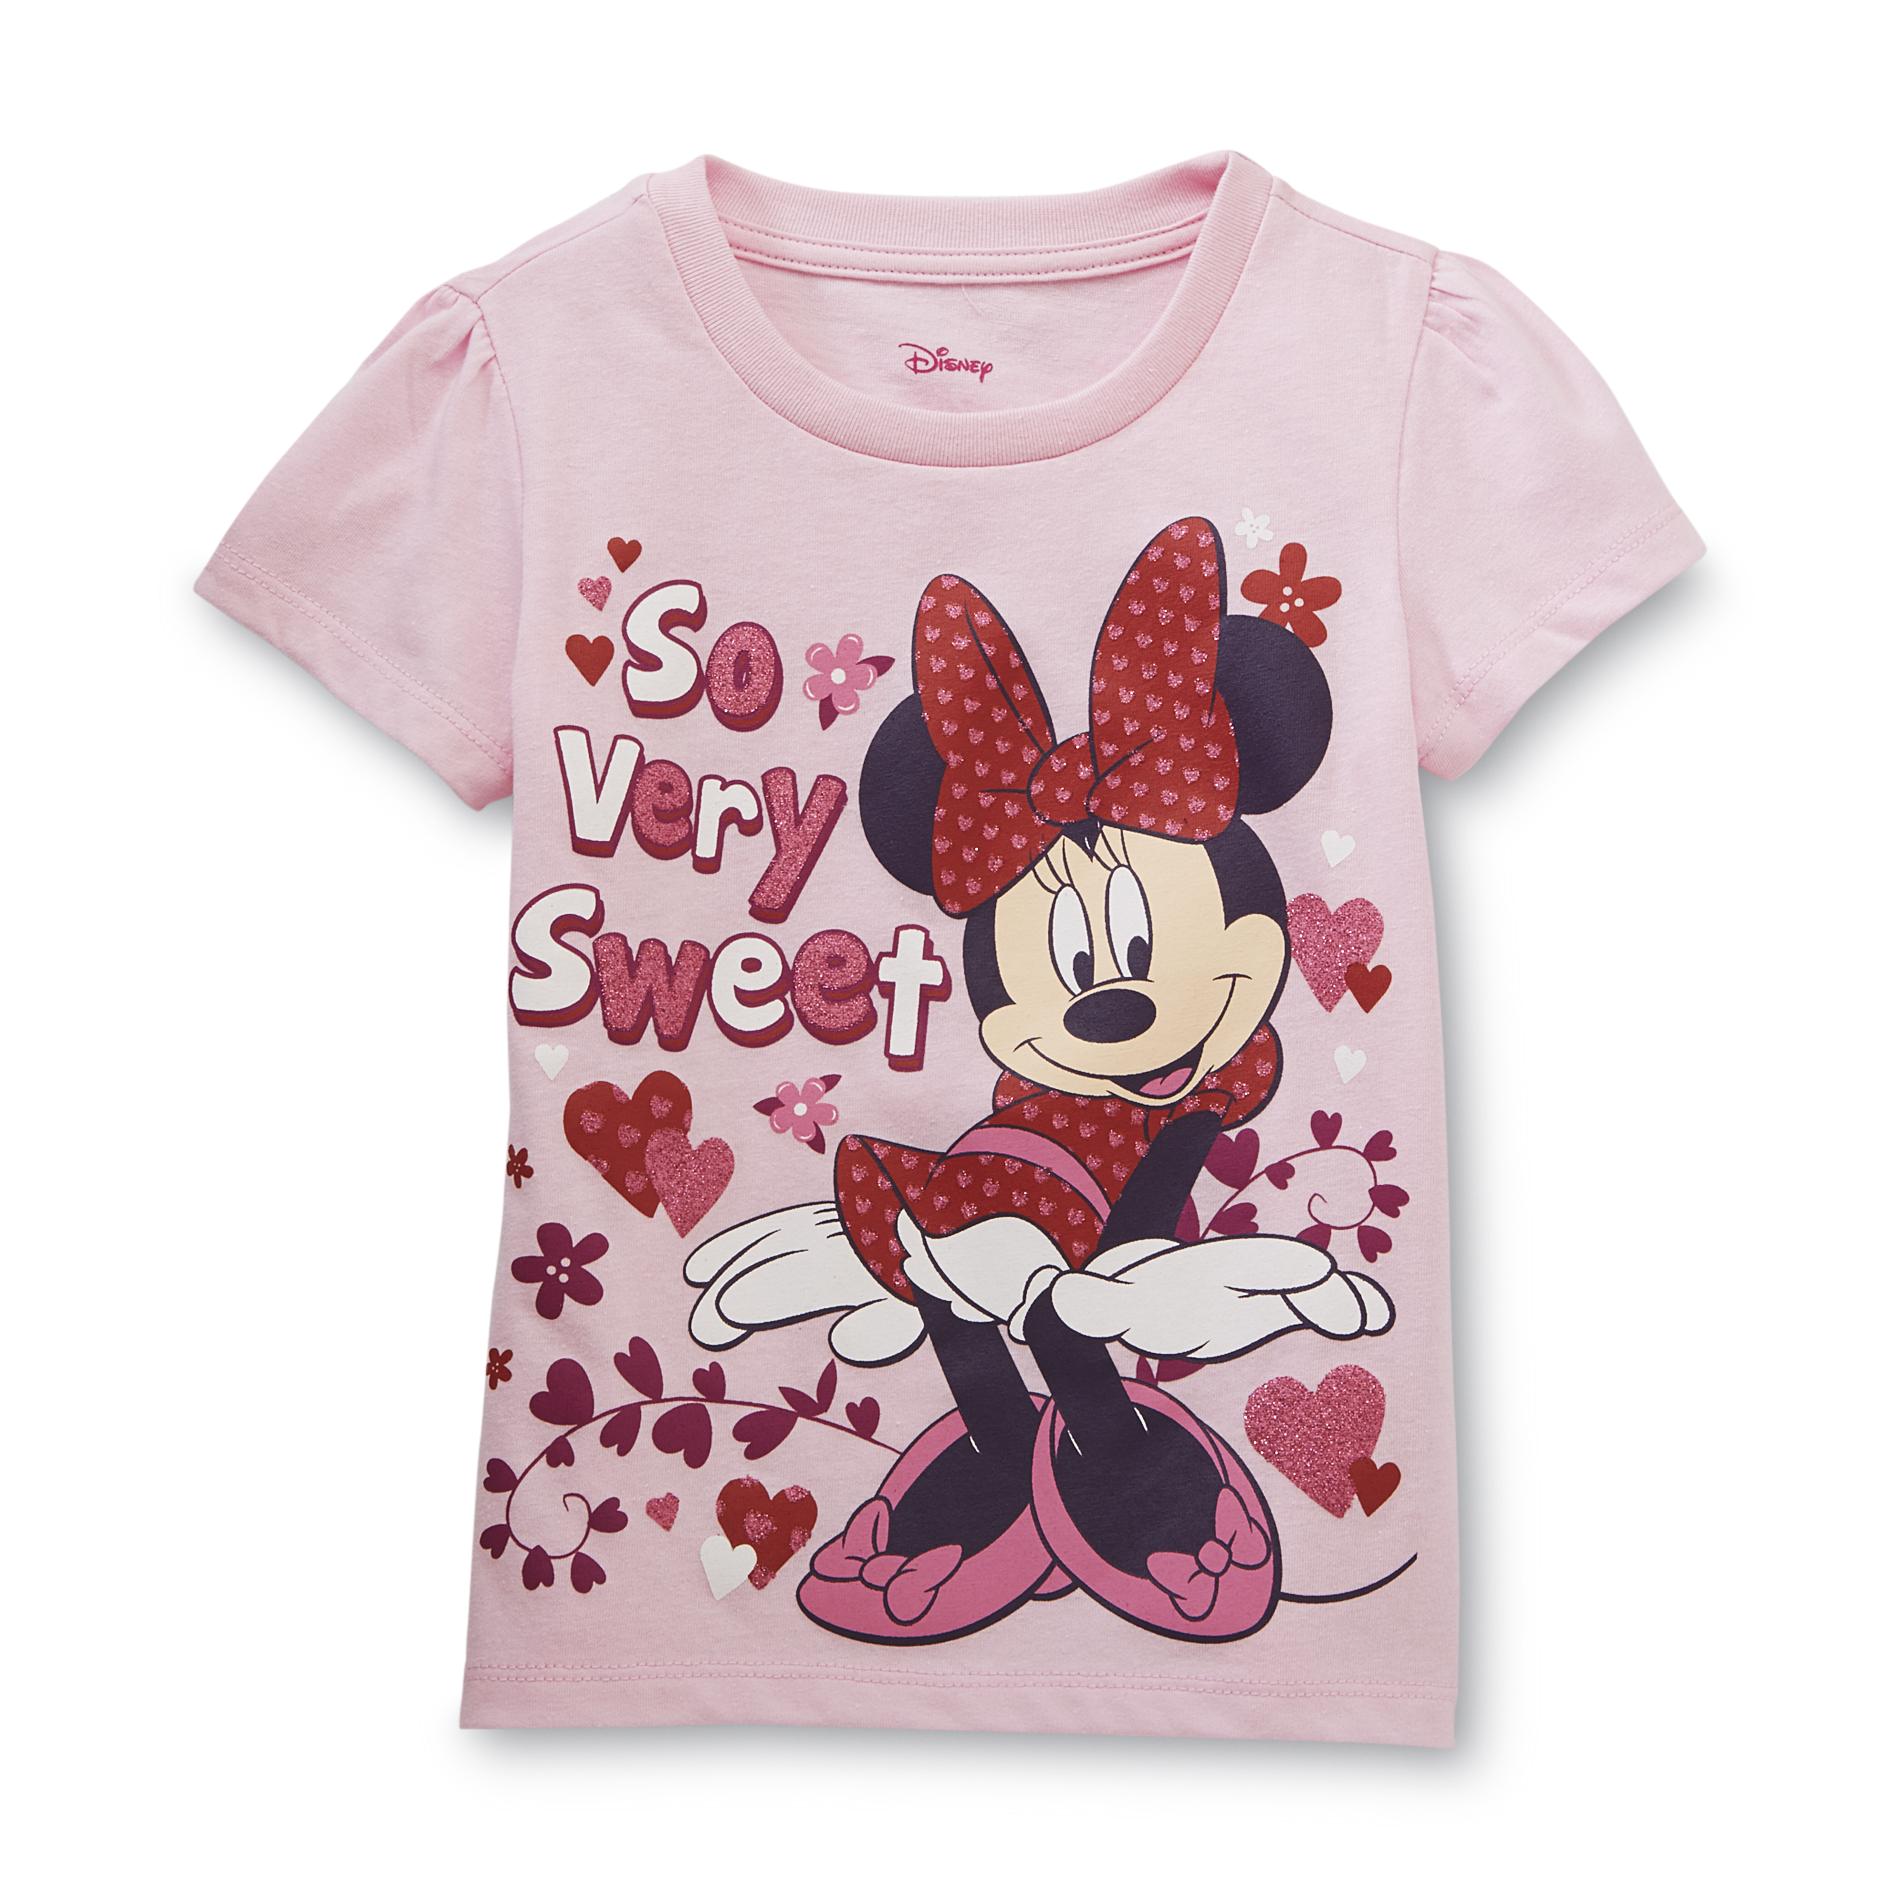 Disney Minnie Mouse Toddler Girl's Valentine's Day T-Shirt